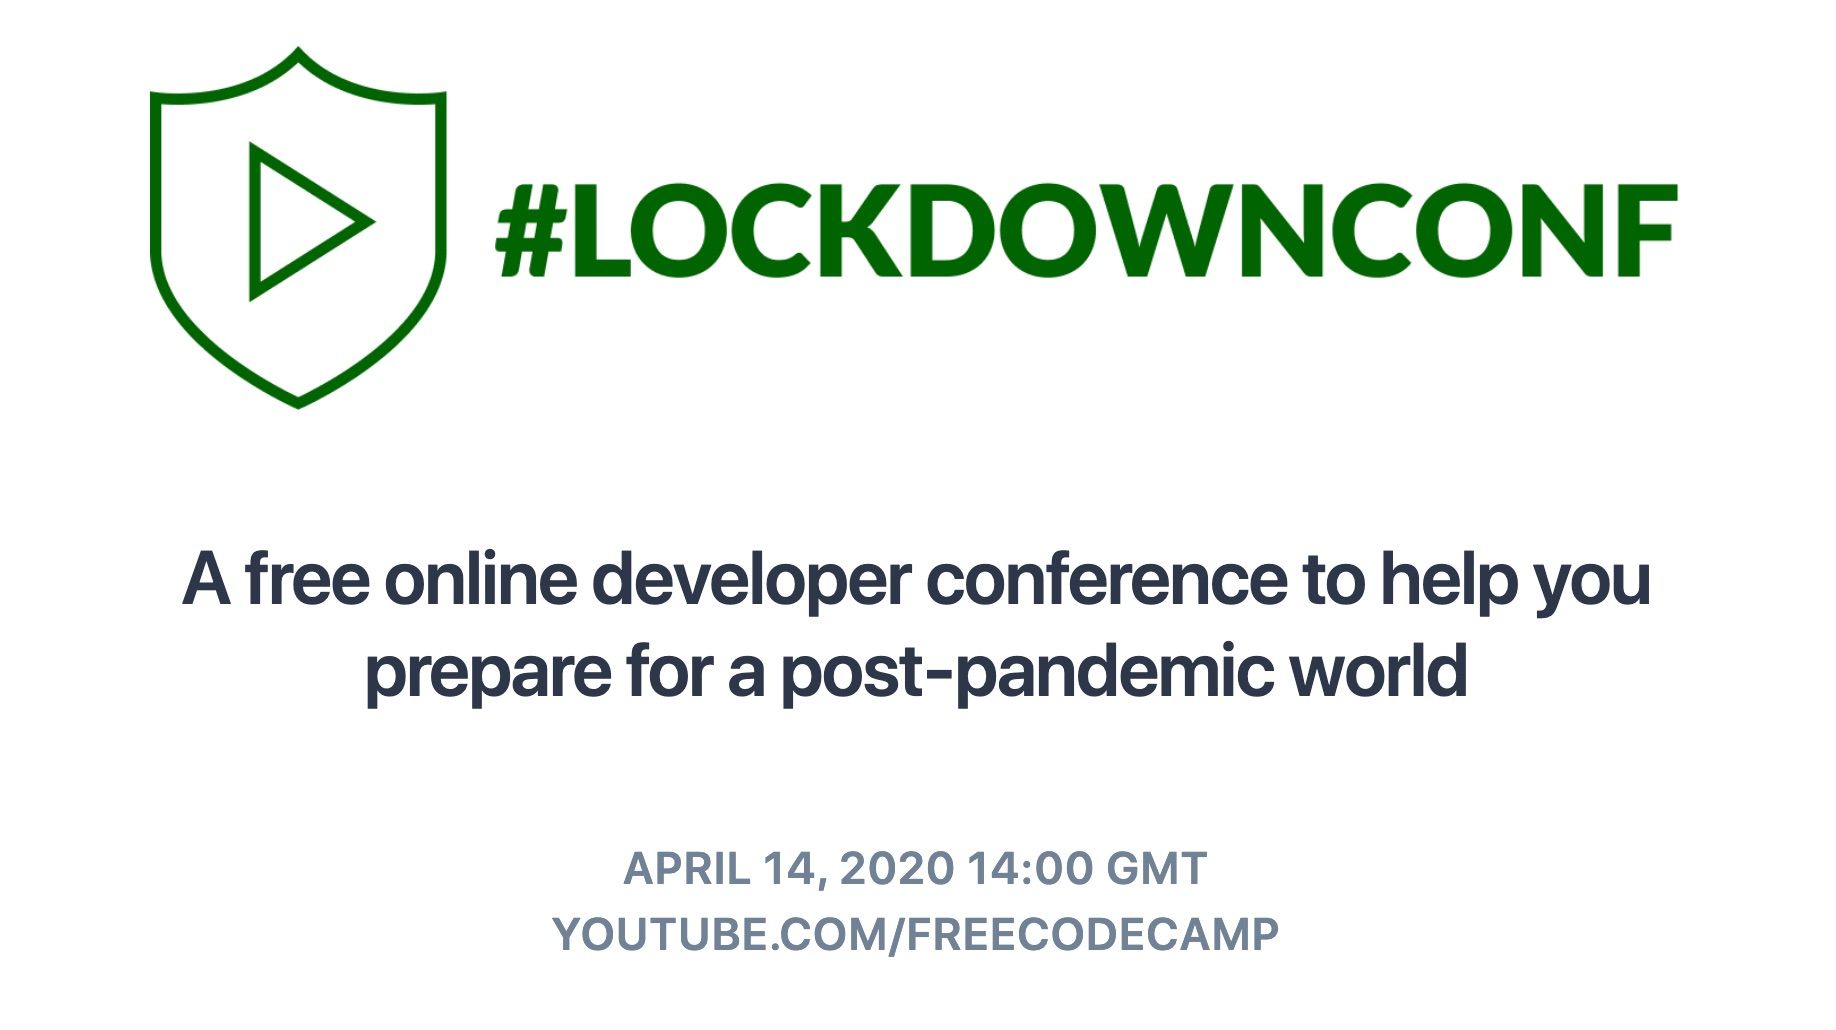 _LockdownConf_-_A_free_online_conference_to_help_you_prepare_for_a_post-pandemic_world